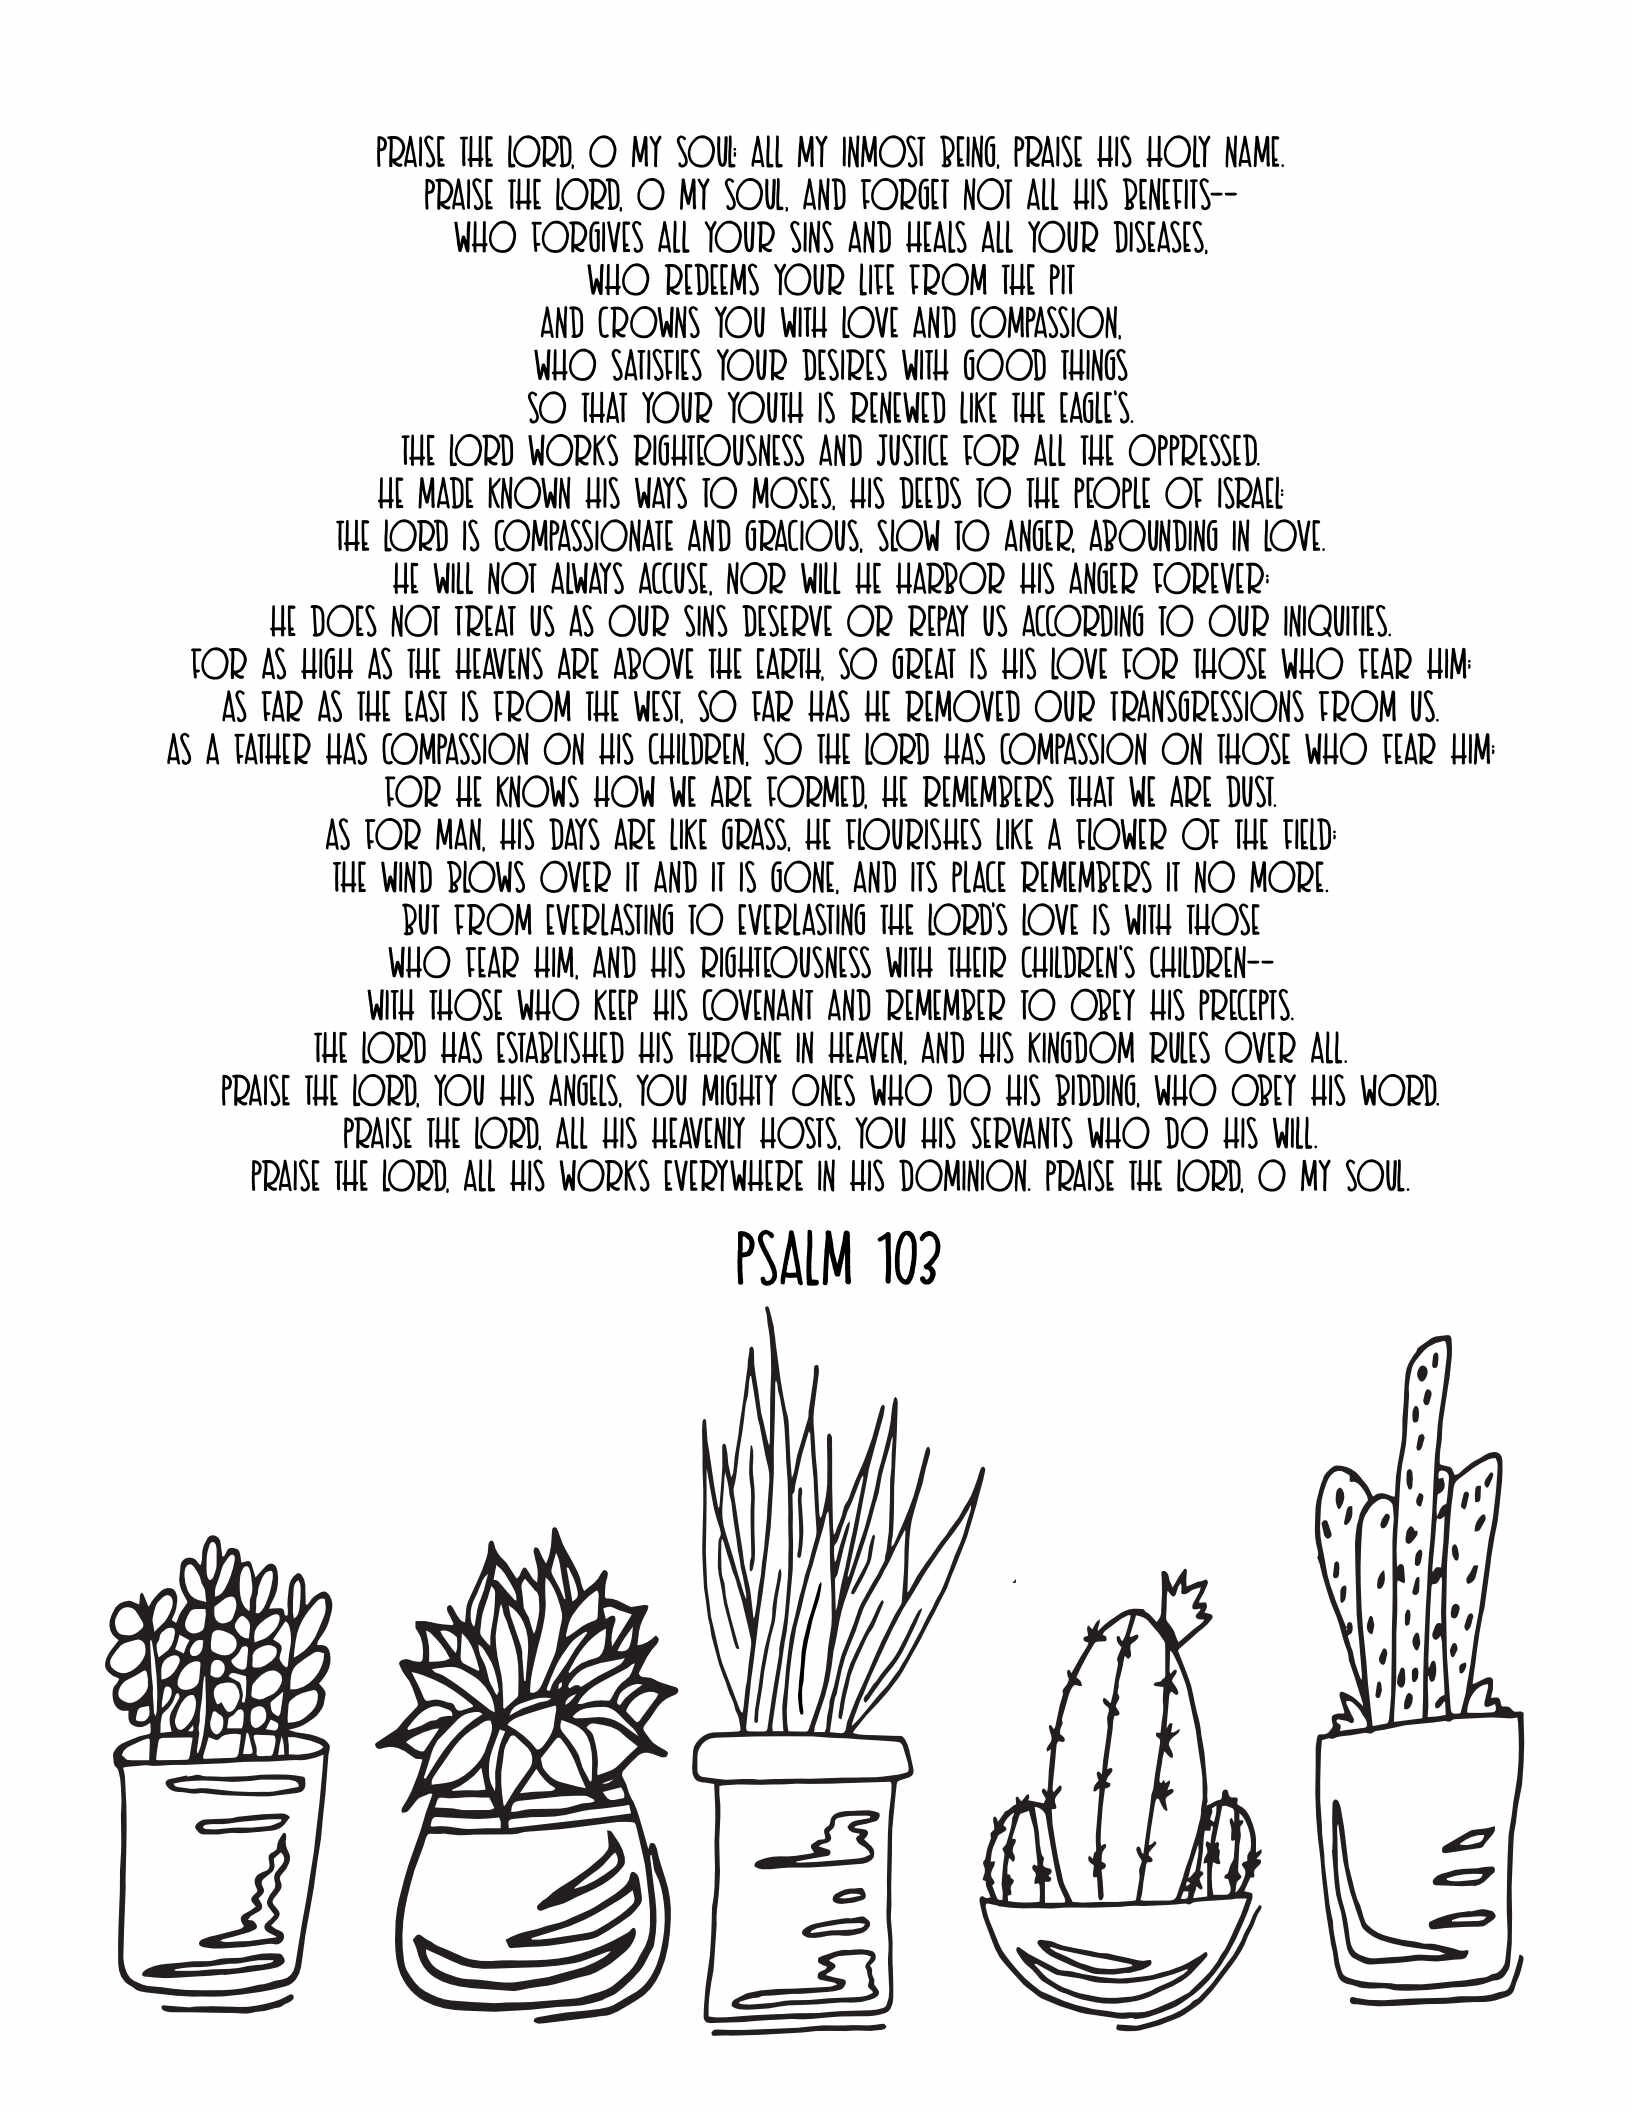 10 Free Printable Psalm Coloring Pages - Download and Color Adult Scripture - Psalm 103CLICK HERE TO DOWNLOAD THIS PAGE FREE